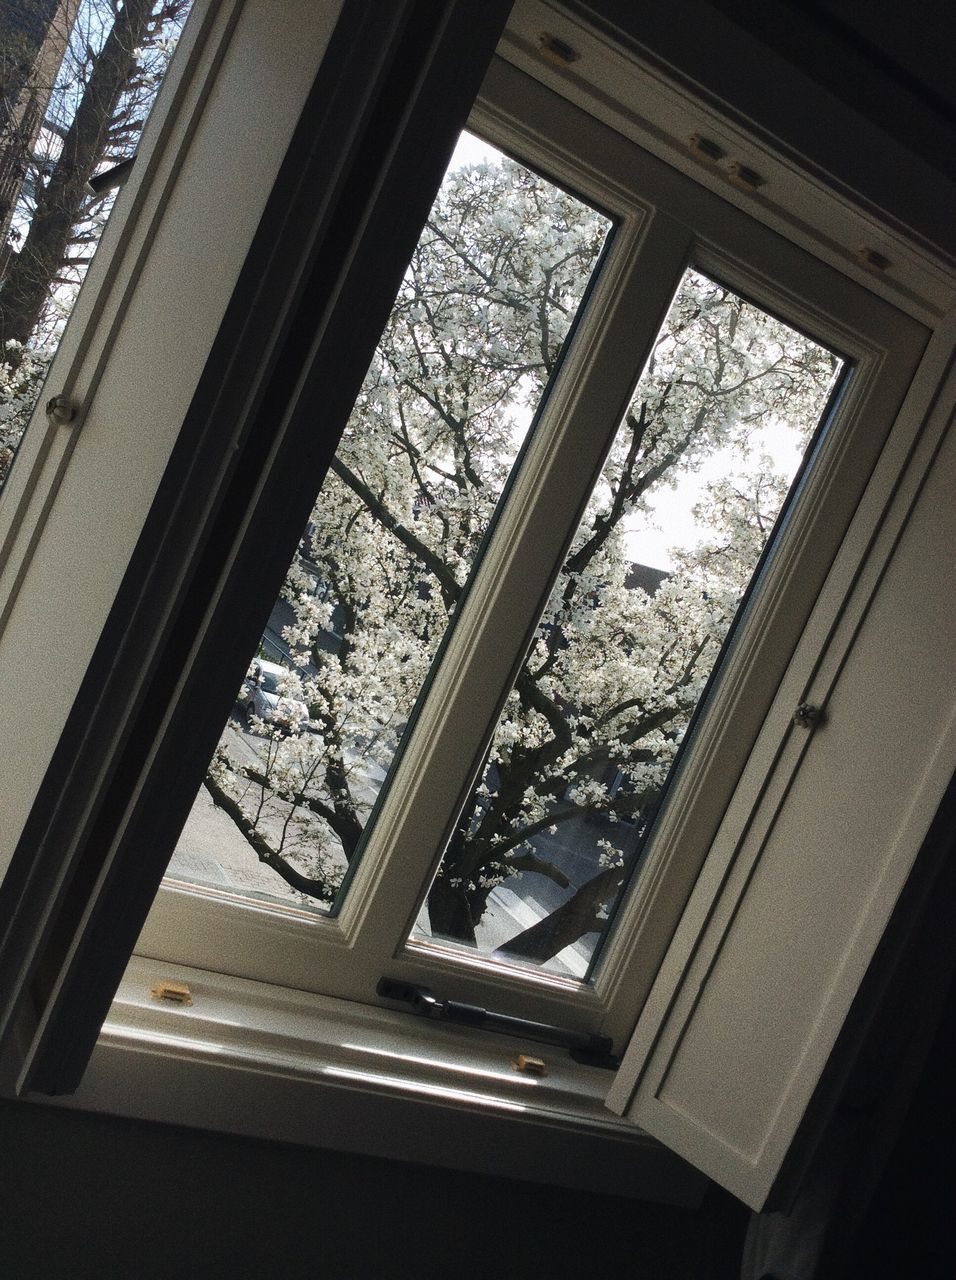 window, pattern, indoors, day, no people, low angle view, built structure, tree, close-up